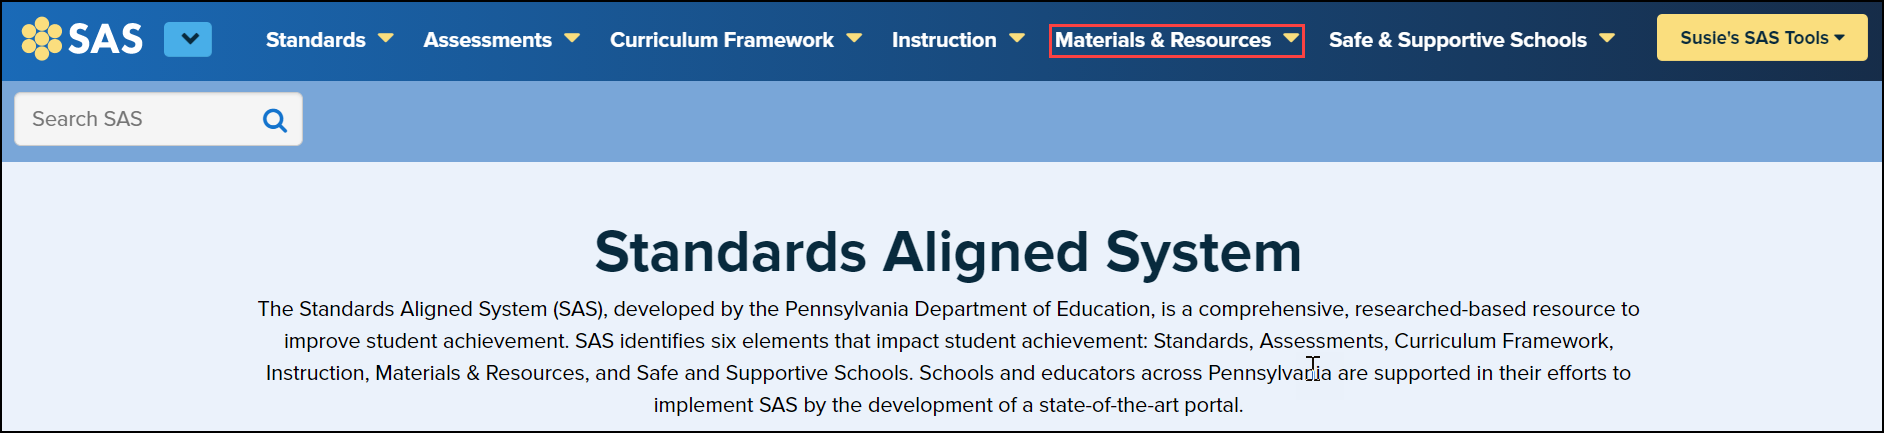 SAS homepage with materials and resources button highlighted